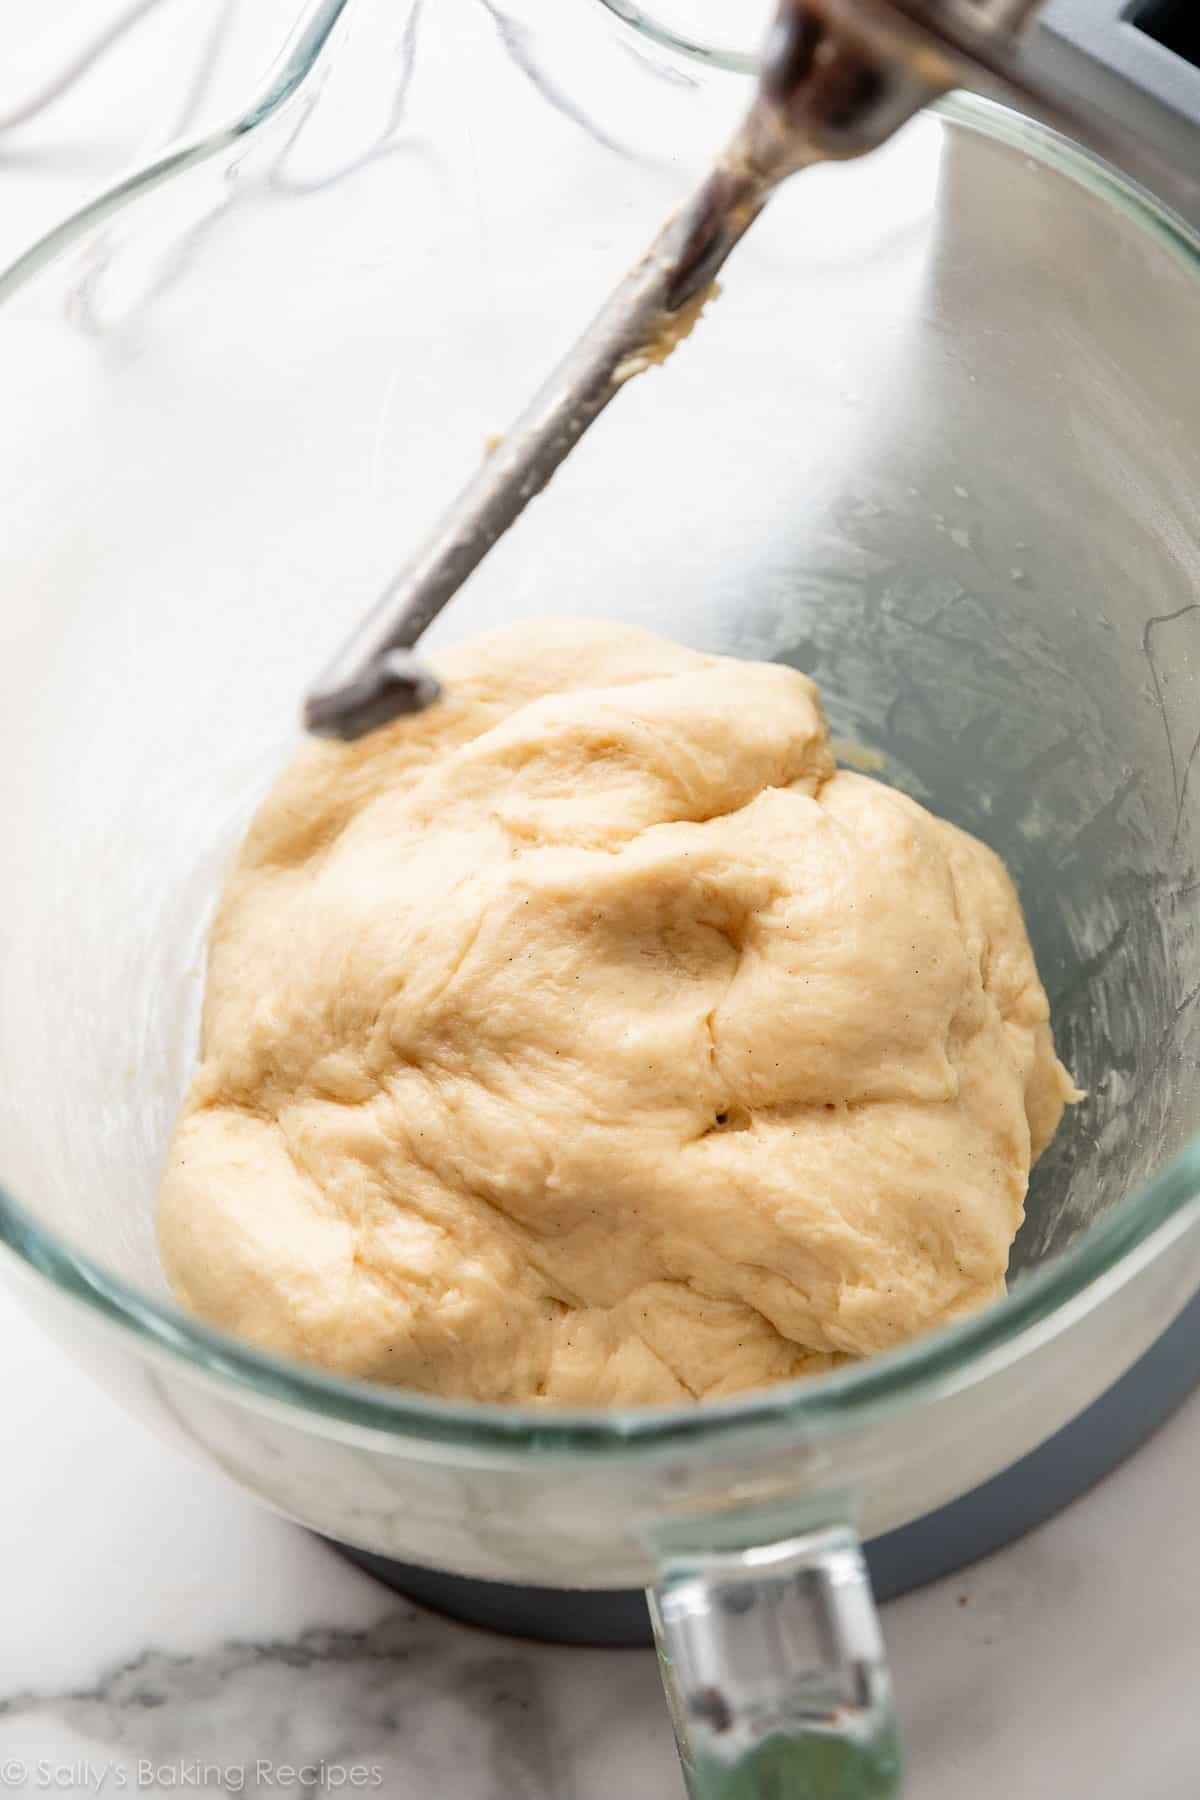 dough in glass bowl of stand mixer.